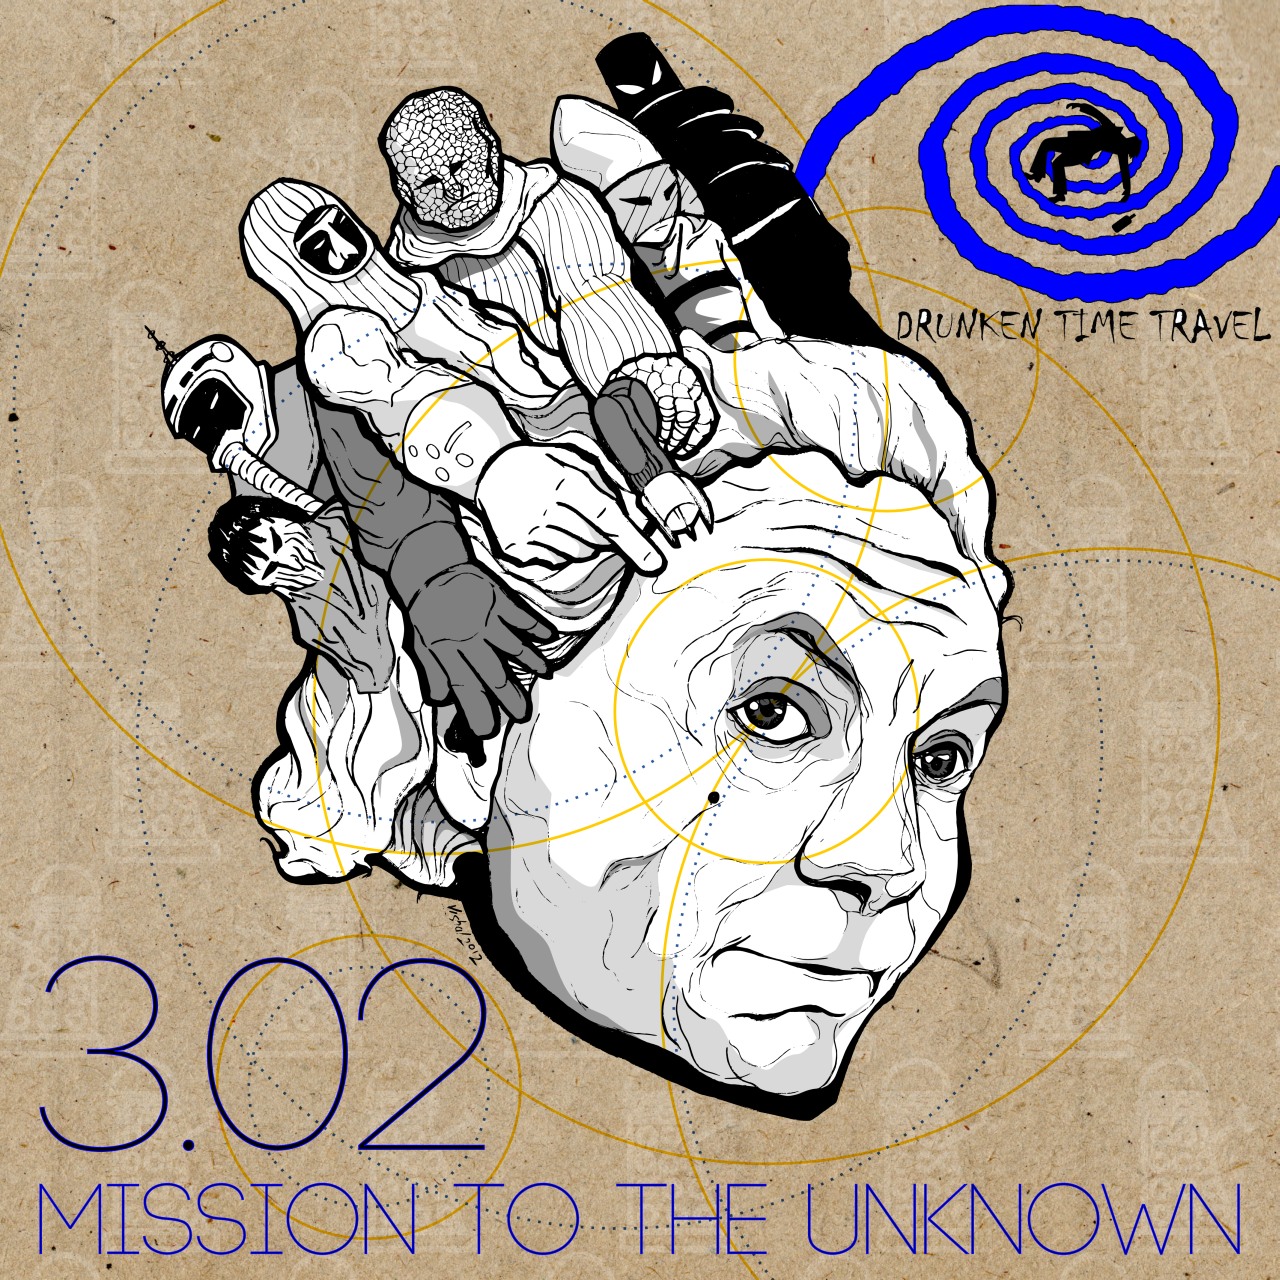 3.02 Mission To The Unknown